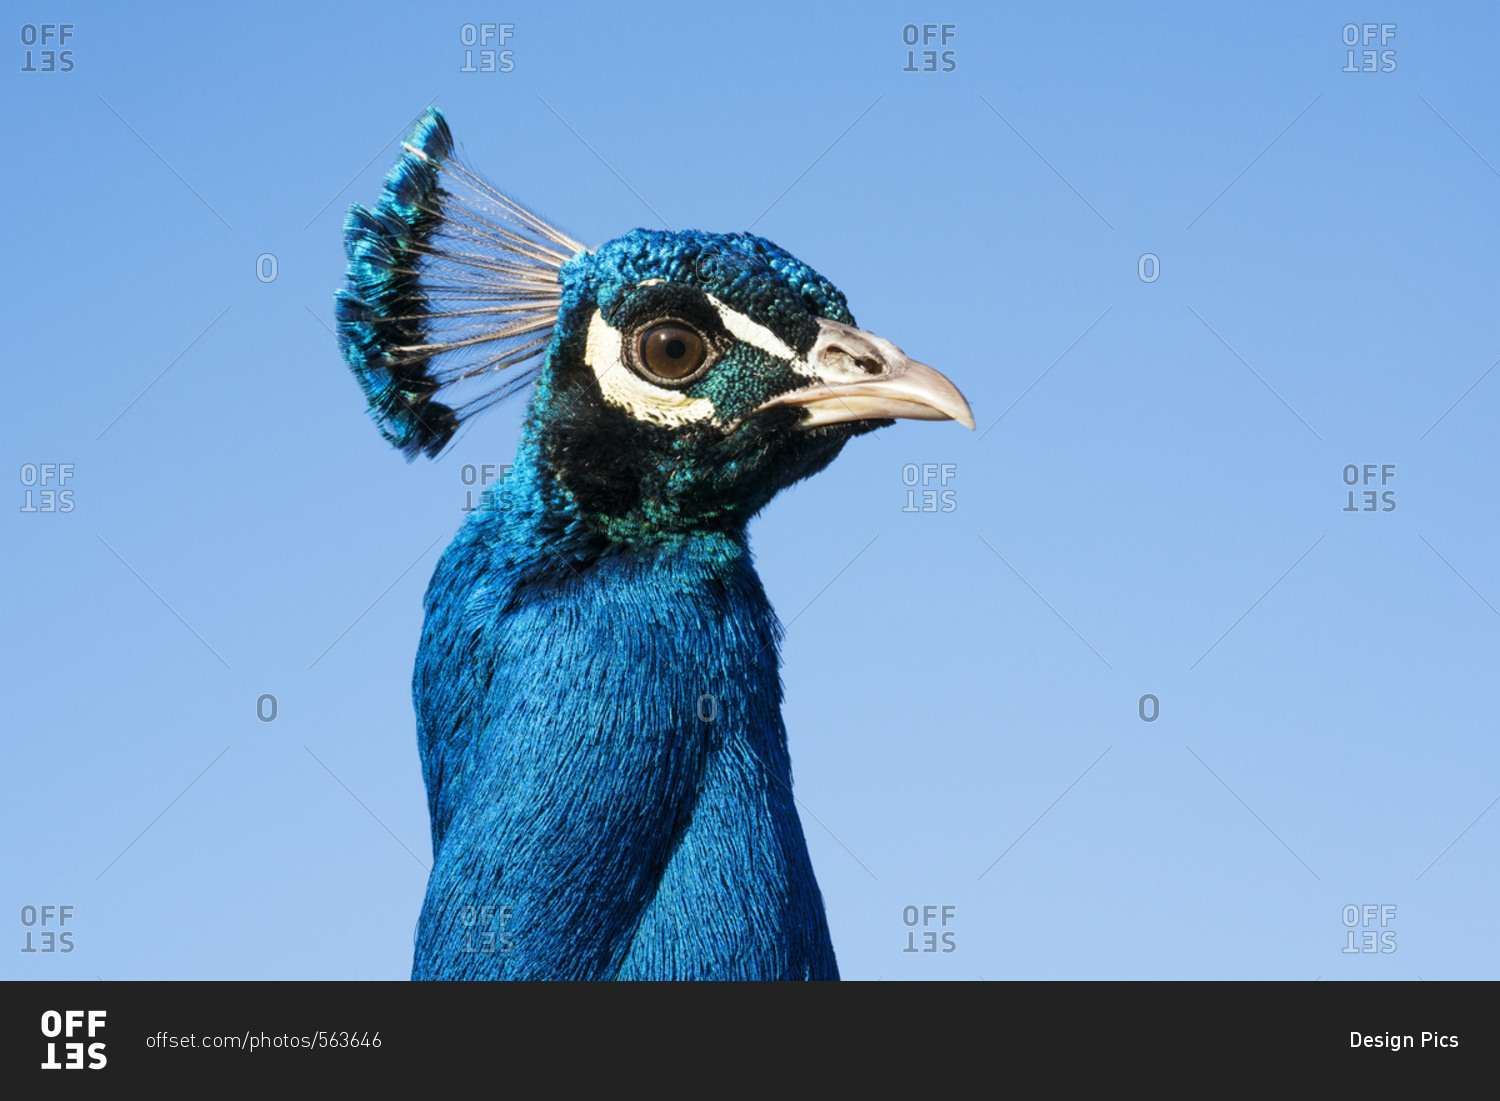 A beautiful blue bird with a crown of feathers on it's head against a blue sky, South Shields, Tyne and Wear, England